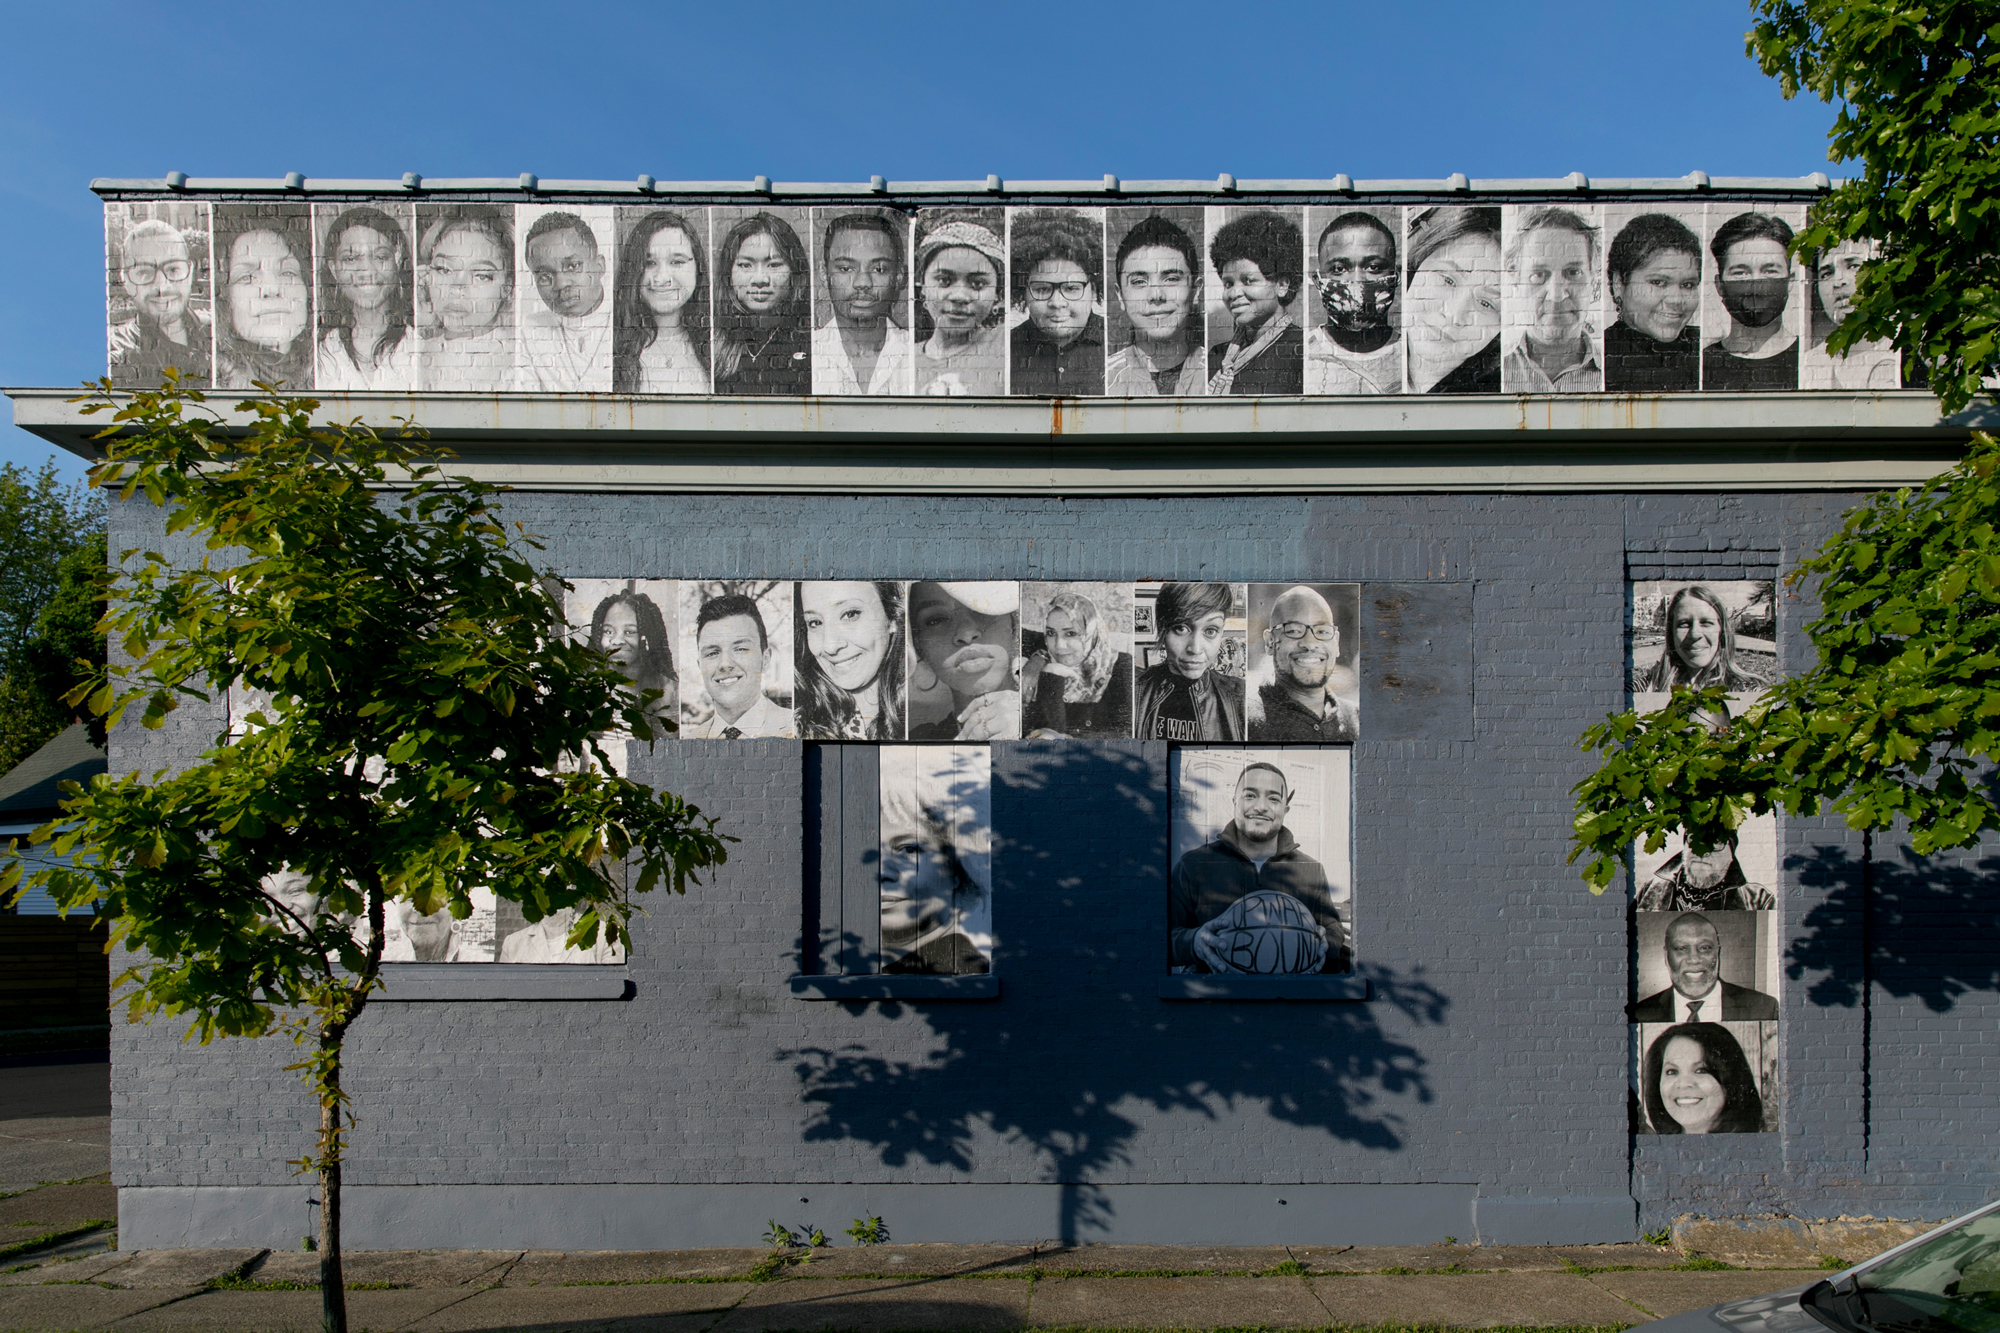 people's portraits on the side of a brick building